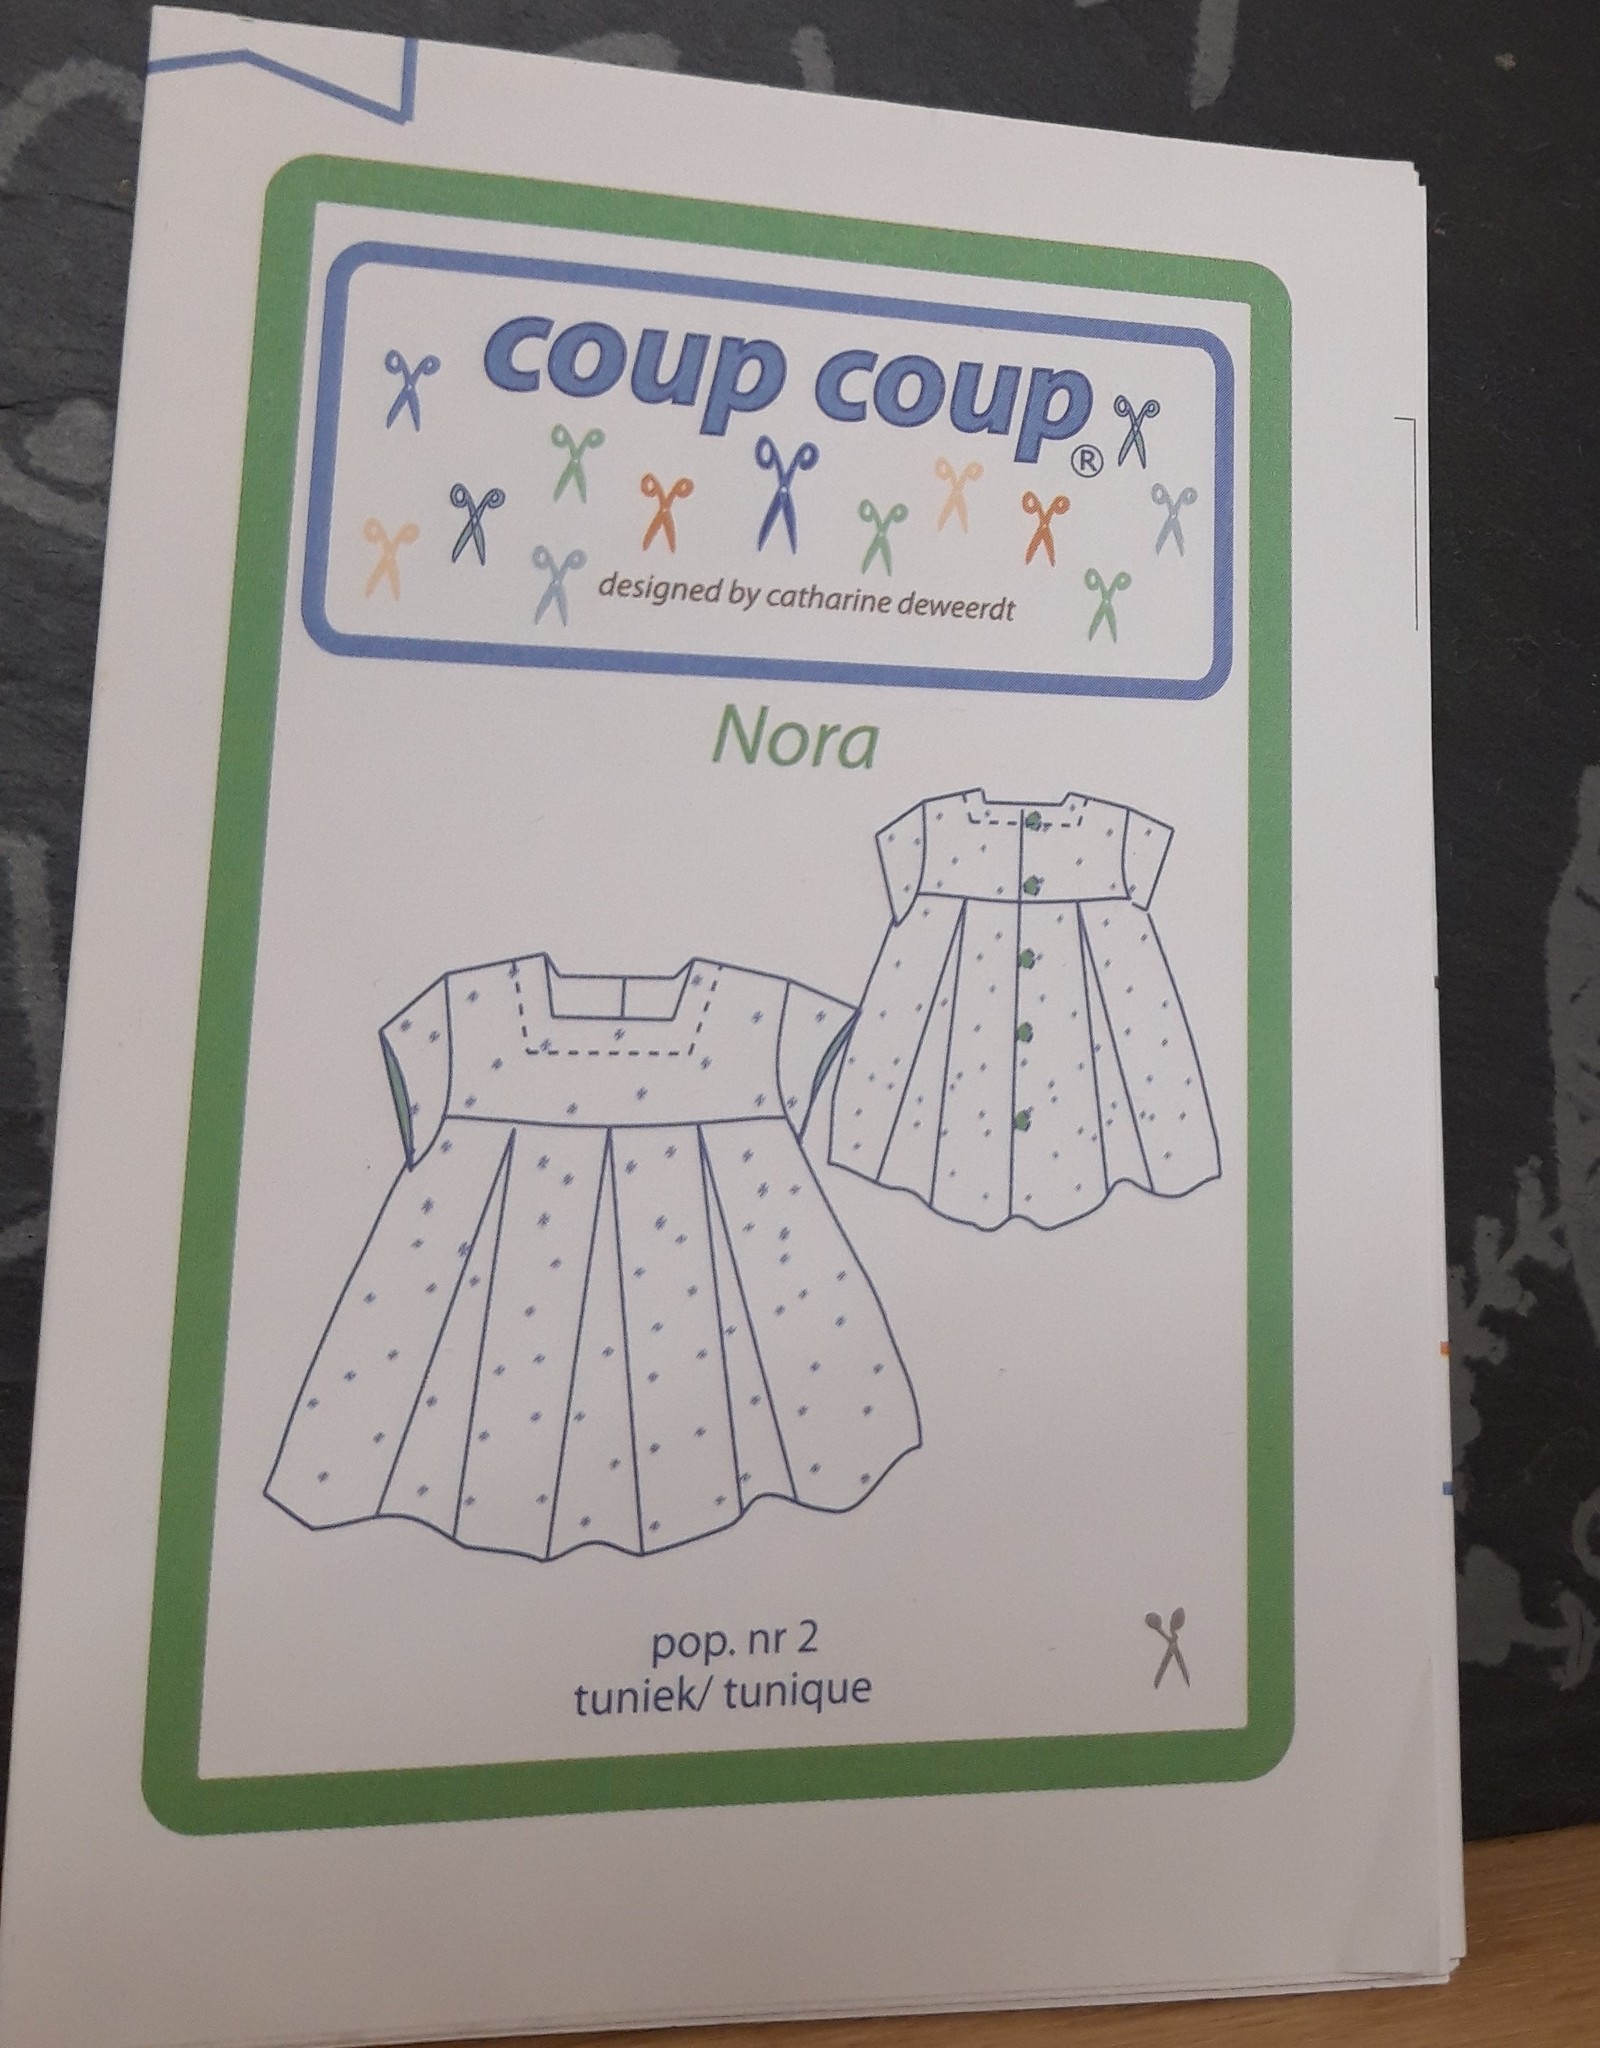 coup coup Nora tuniek voor pop nr 2 - coup coup